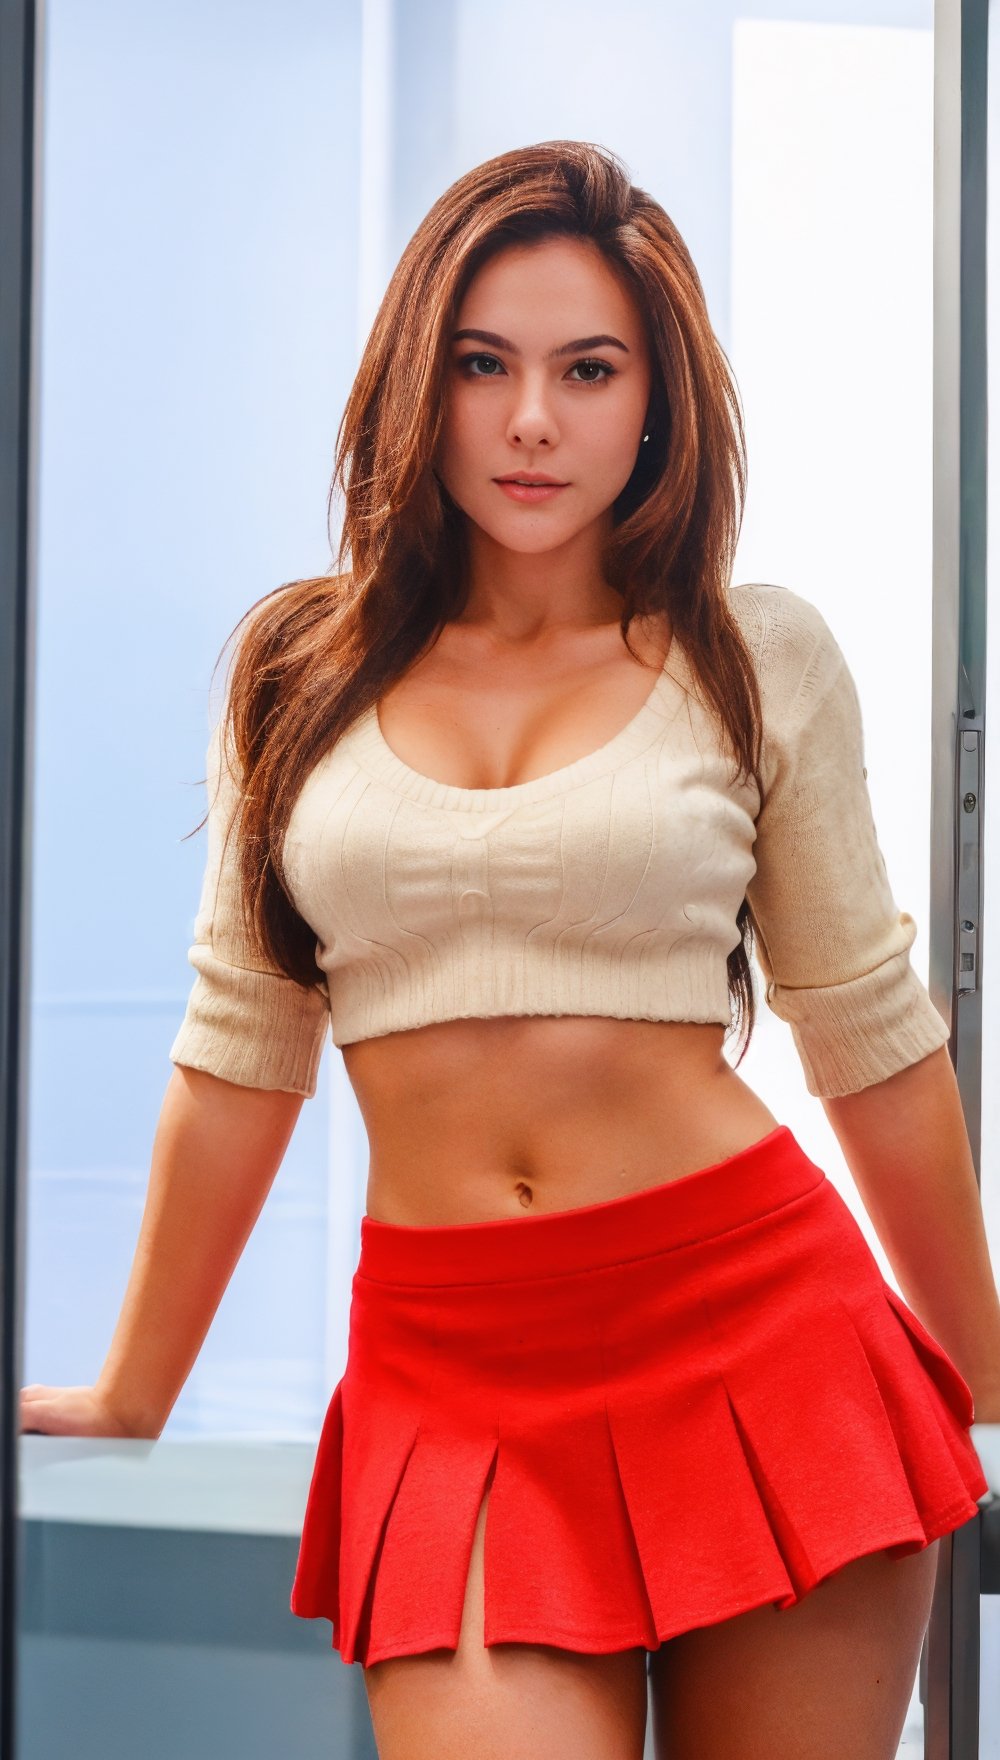 Beautiful woman with long brown hair, 24 years old, well-built, has a mole above her lip, ideally wearing a tenis outfit,  buzz, sharp looks, high quality photography, street cinema,open chest sweater,wul4n,m3shm3dus4,micro miniskirt,Pectoral Focus,against glass